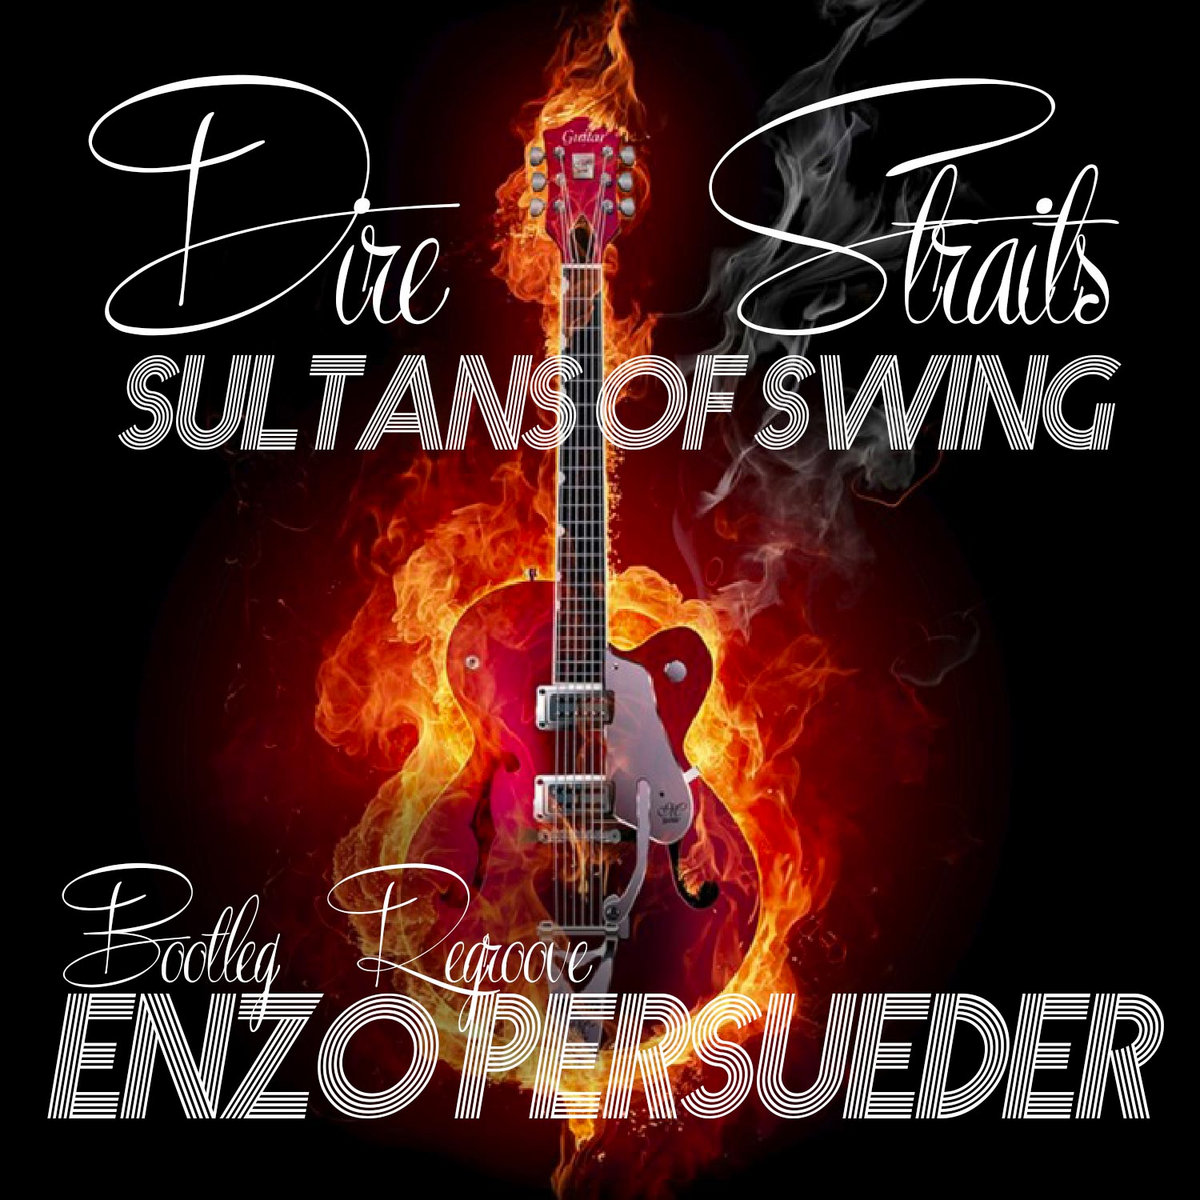 Dire Straits - Sultans Of Swing (E. Persueder Bootleg Regroove